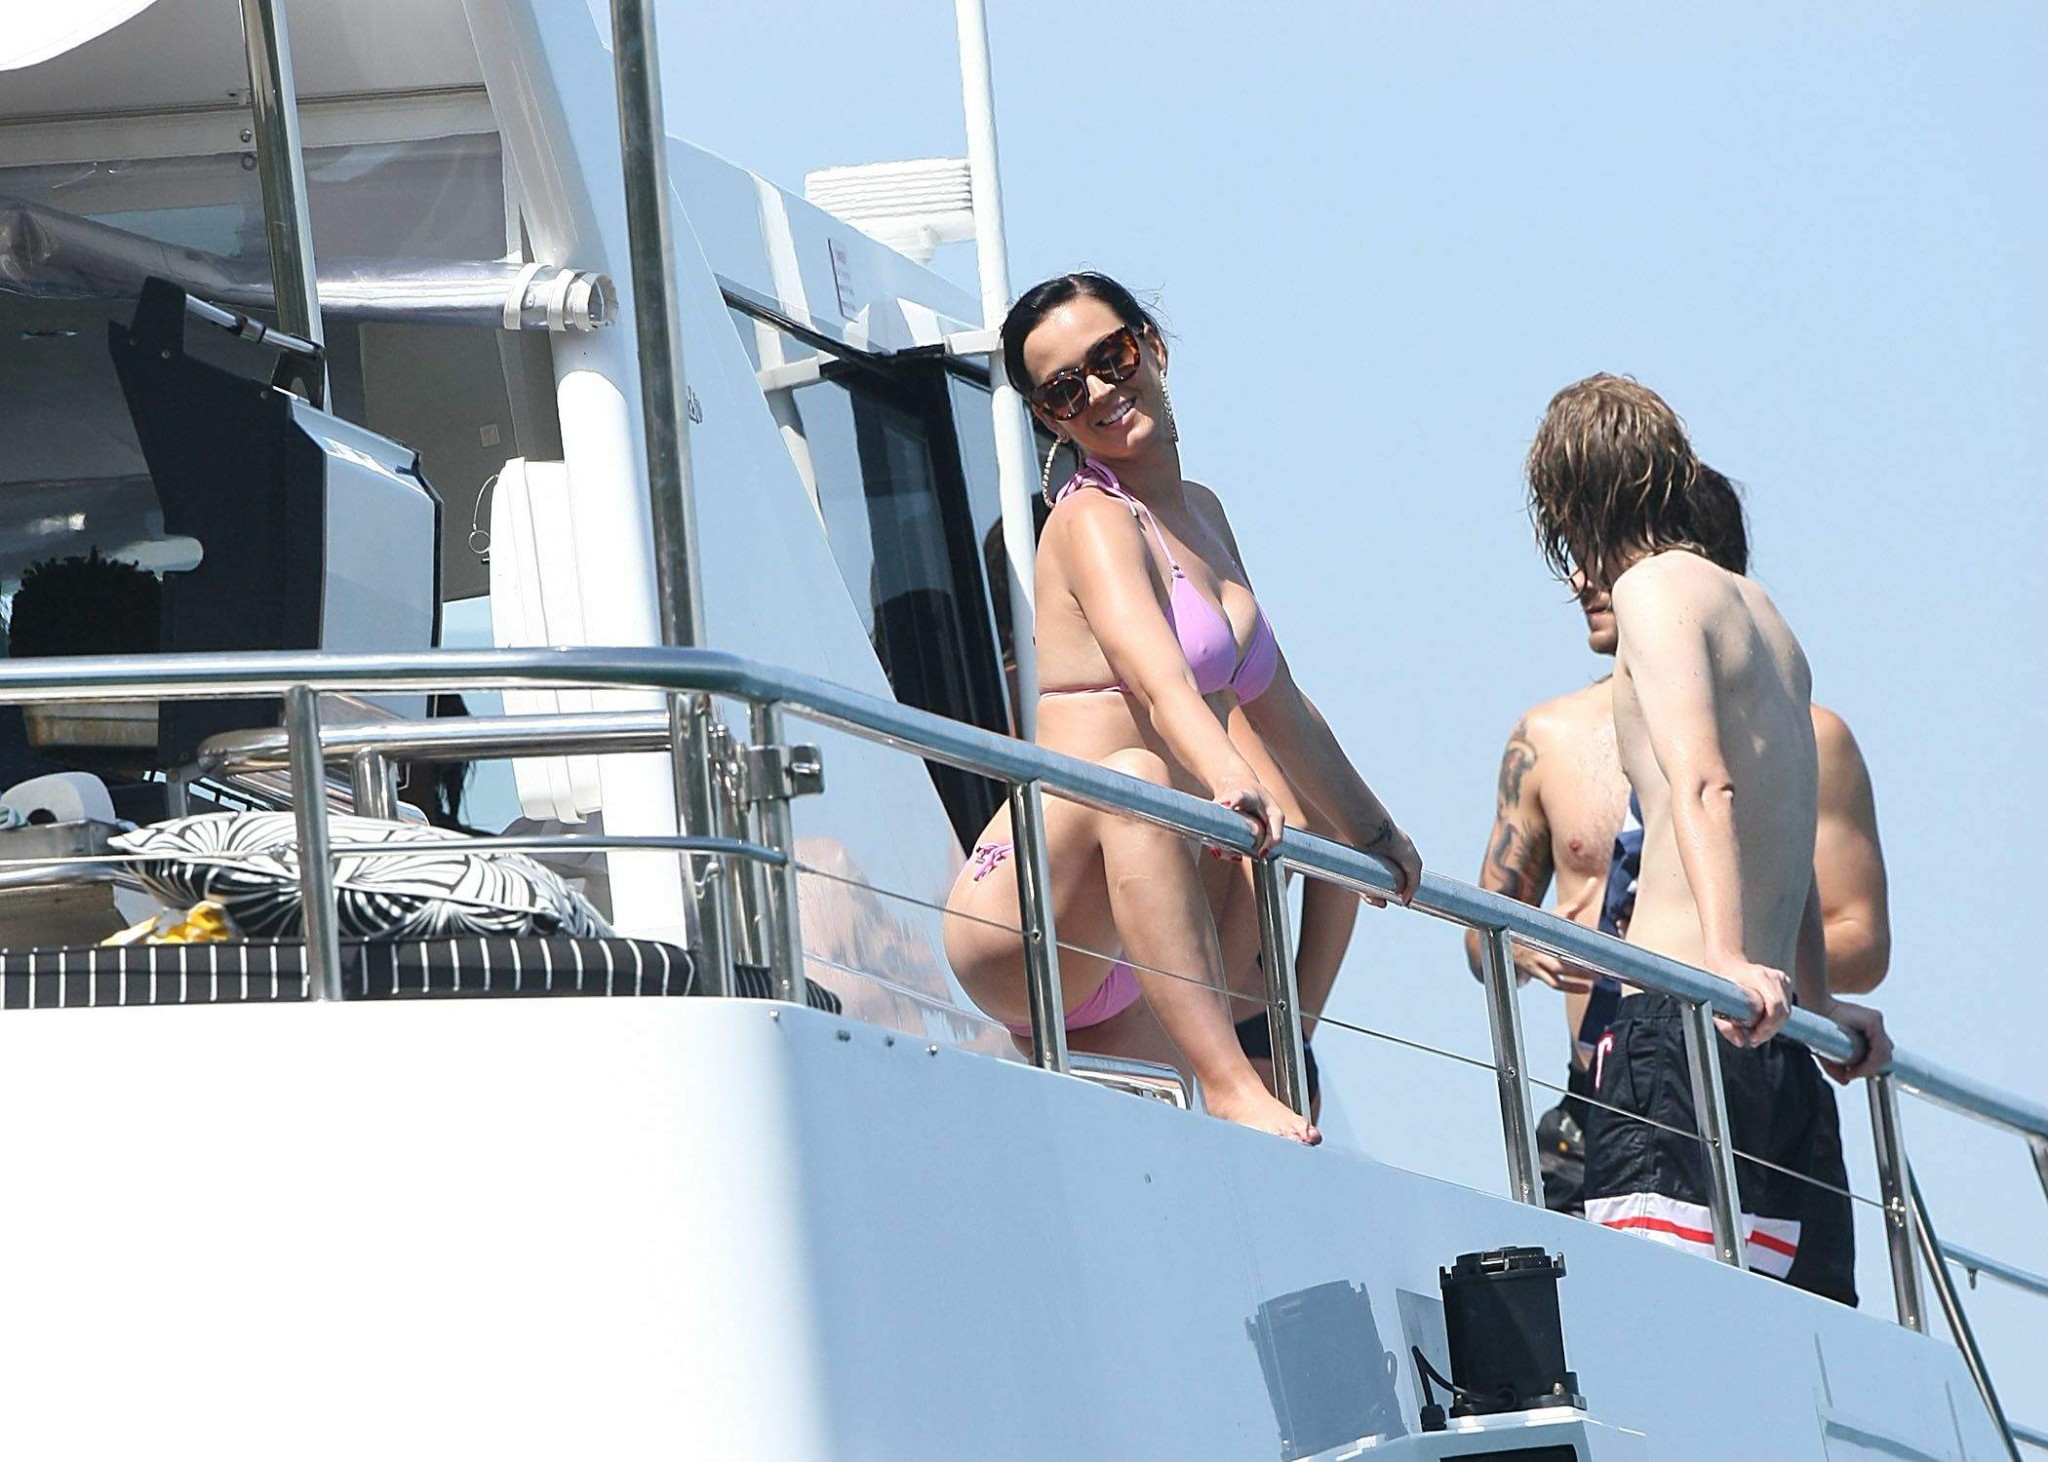 Katy Perry showing off her bikini body and cameltoe on a yacht in Sydney #75180232